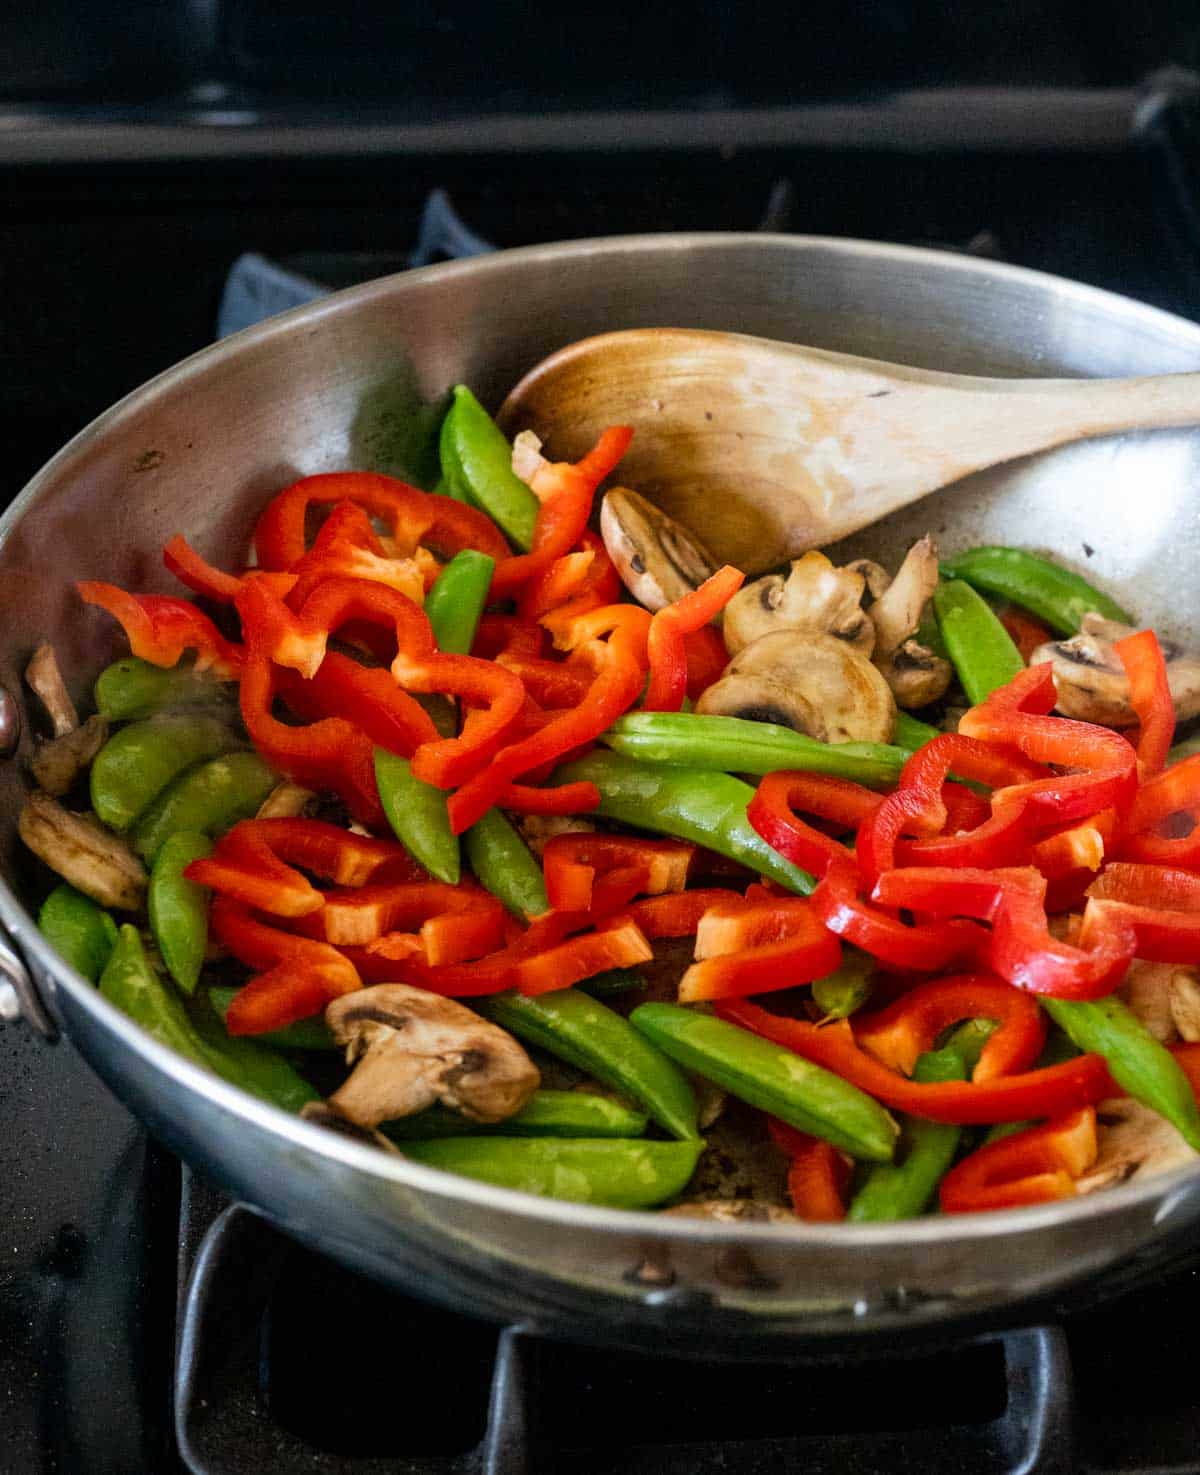 Mushrooms, peppers and sugar snap peas sautéing in a skillet on the stovetop.